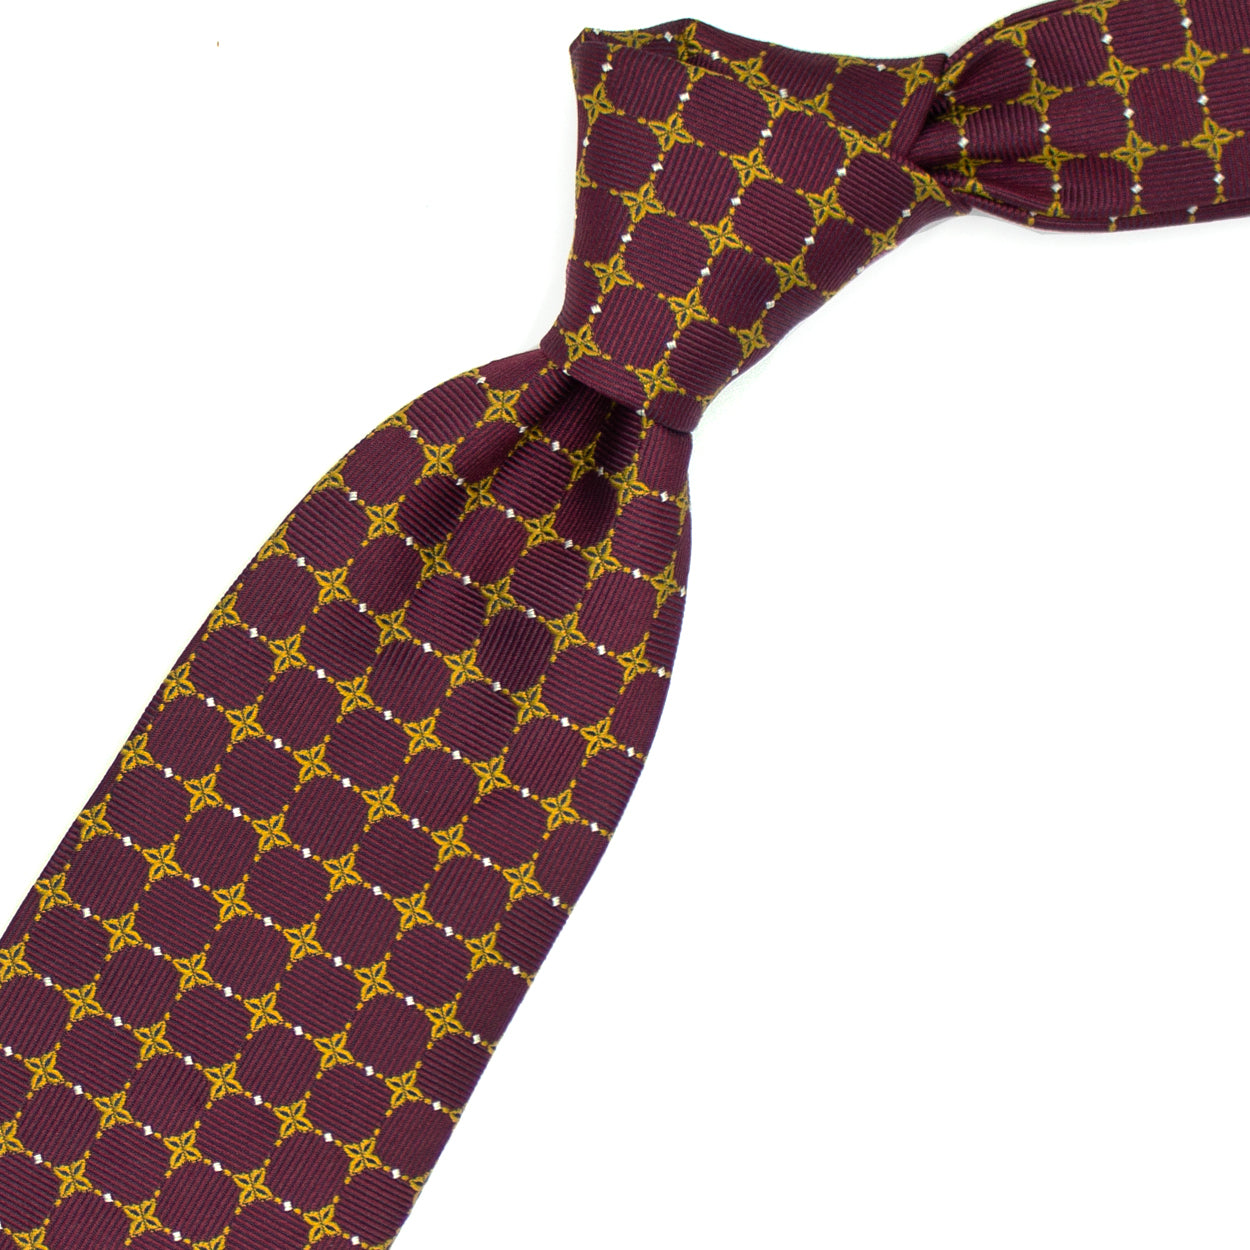 Bordeaux tie with yellow flowers and white squares